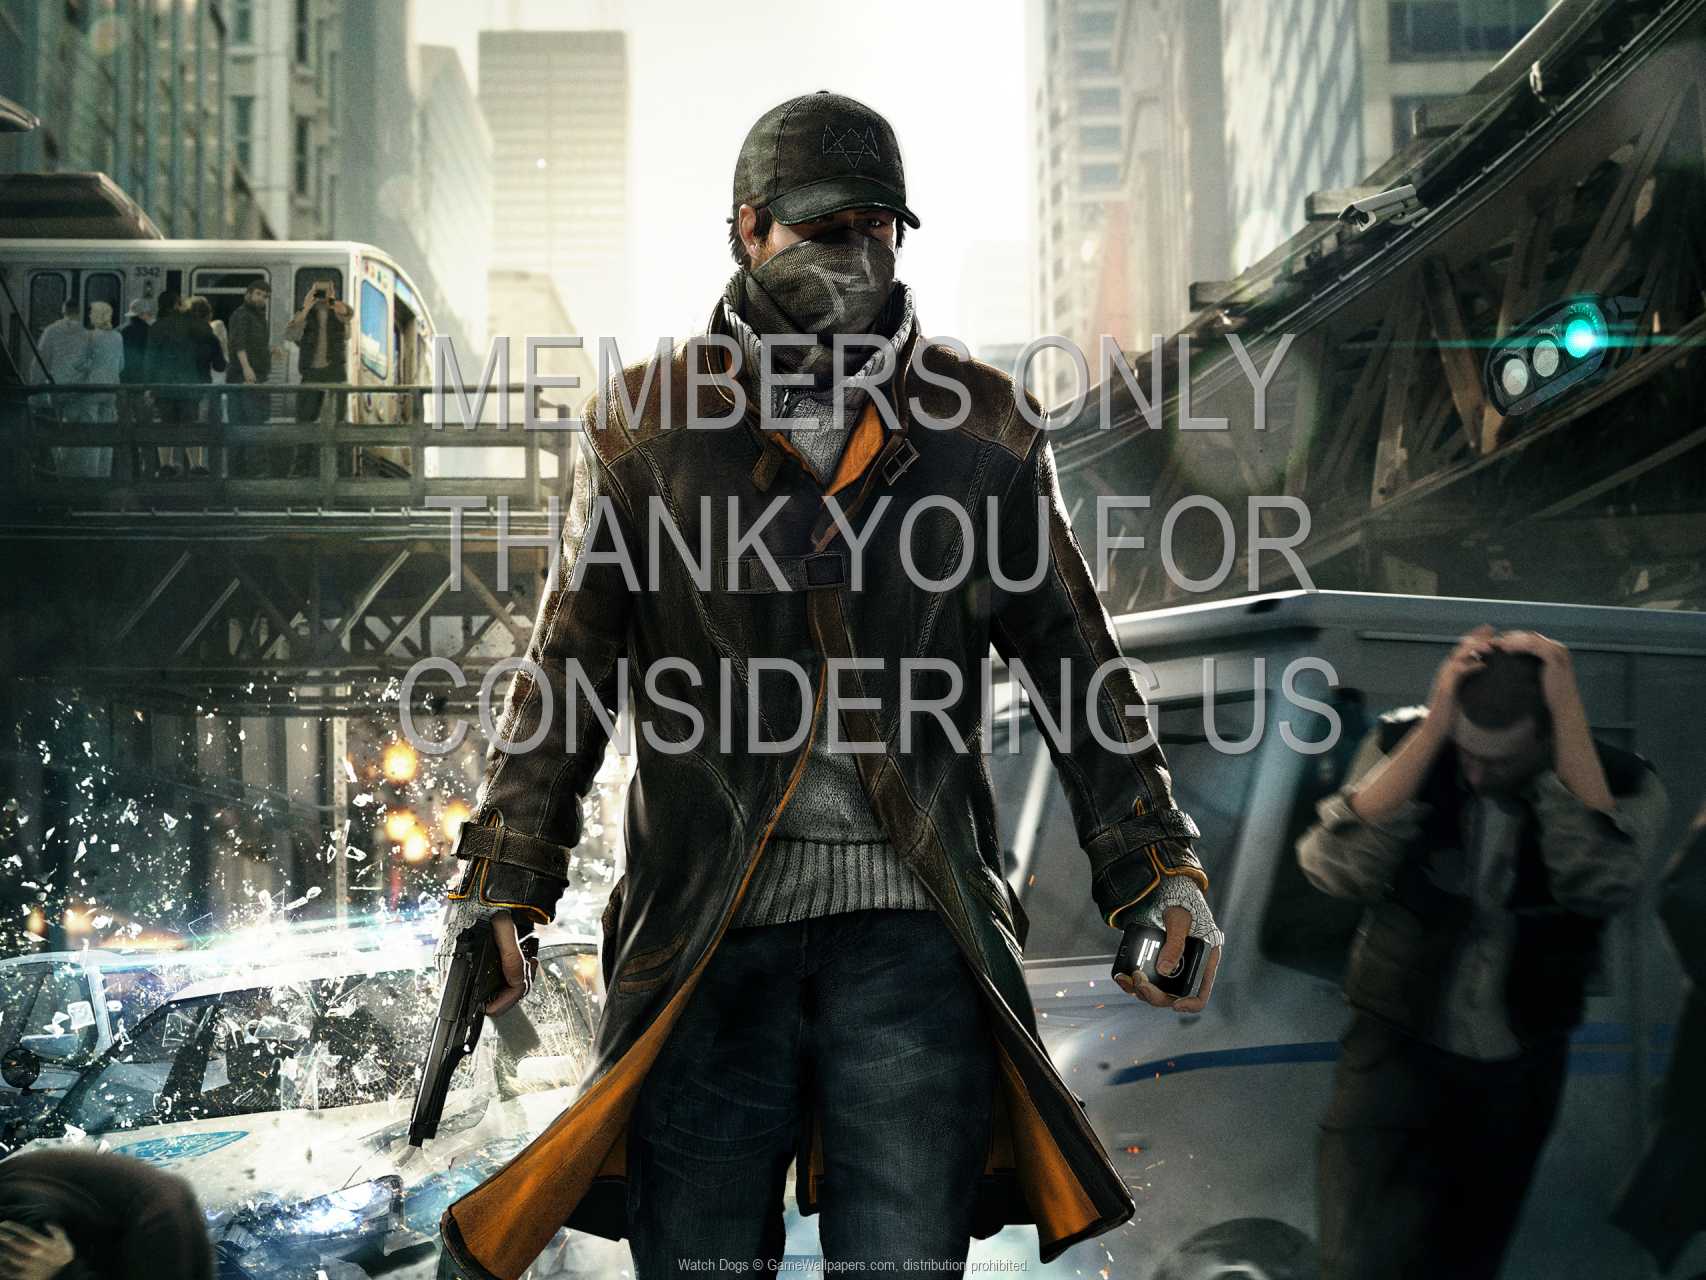 Watch Dogs 720p Horizontal Mobile wallpaper or background 06